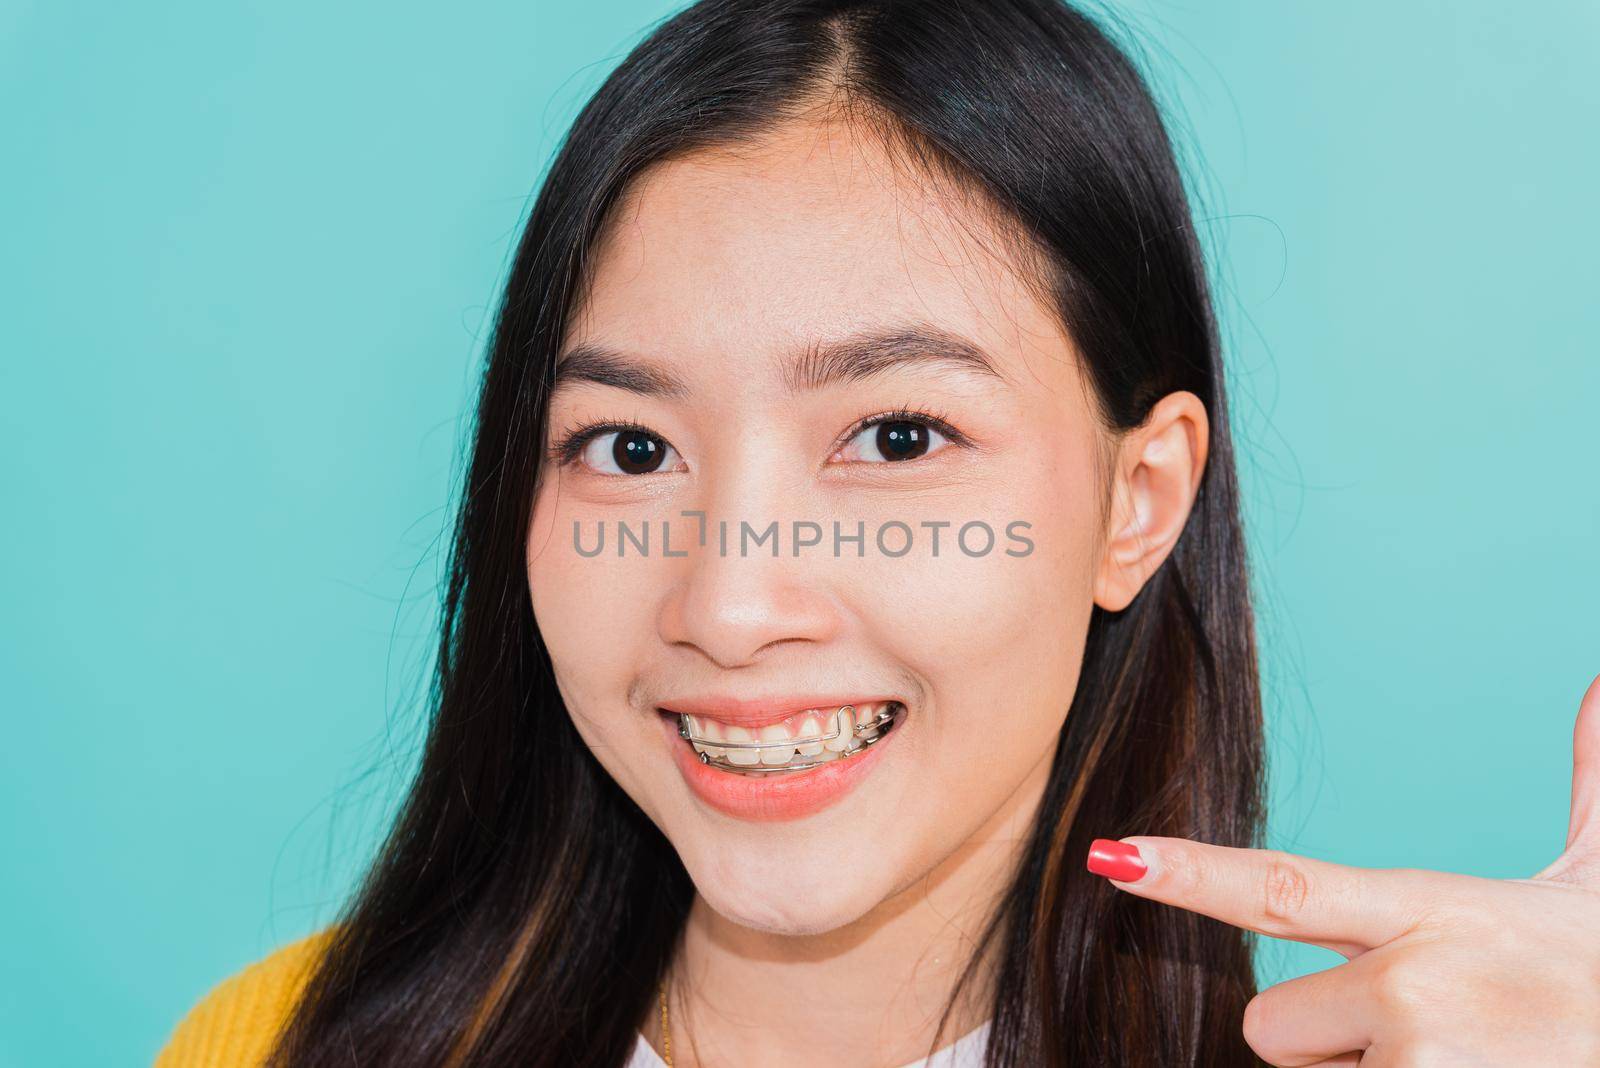 young woman teen pointing finger to teeth by Sorapop